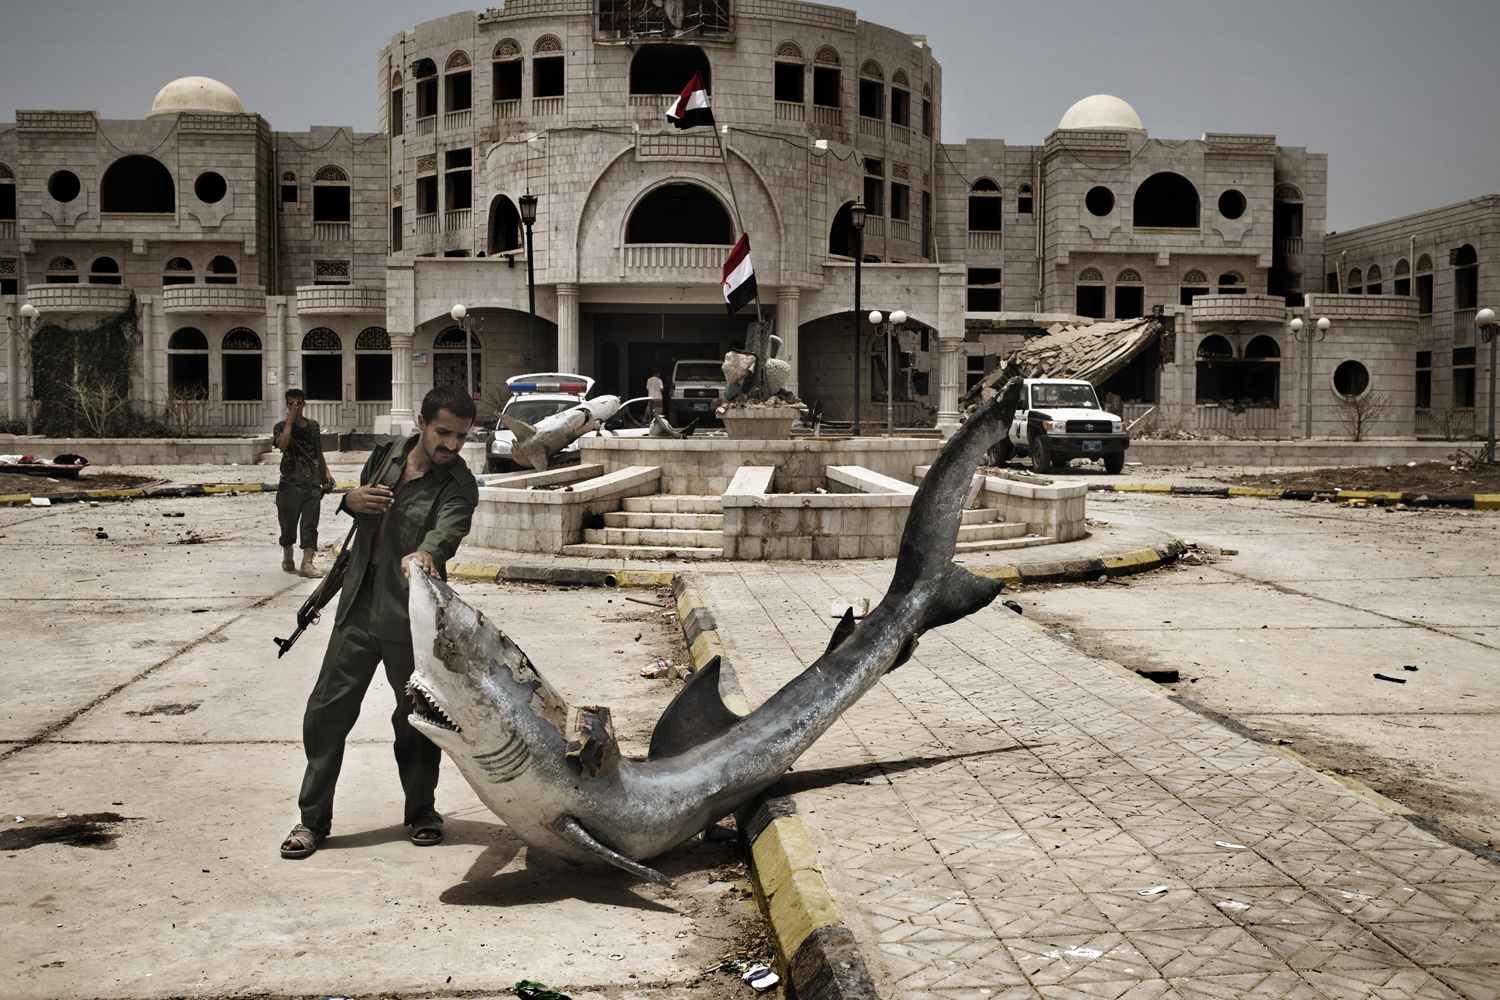 A Yemeni policeman retrieves a fixture of a destroyed water-fountain outside the Governor's Office in Zinjibar. Al-Qaeda in the Arabian Peninsula (AQAP) occupied a large swath of Abyan before being driven out by a combination of government troops, armed citizen groups and U.S. drone attacks.